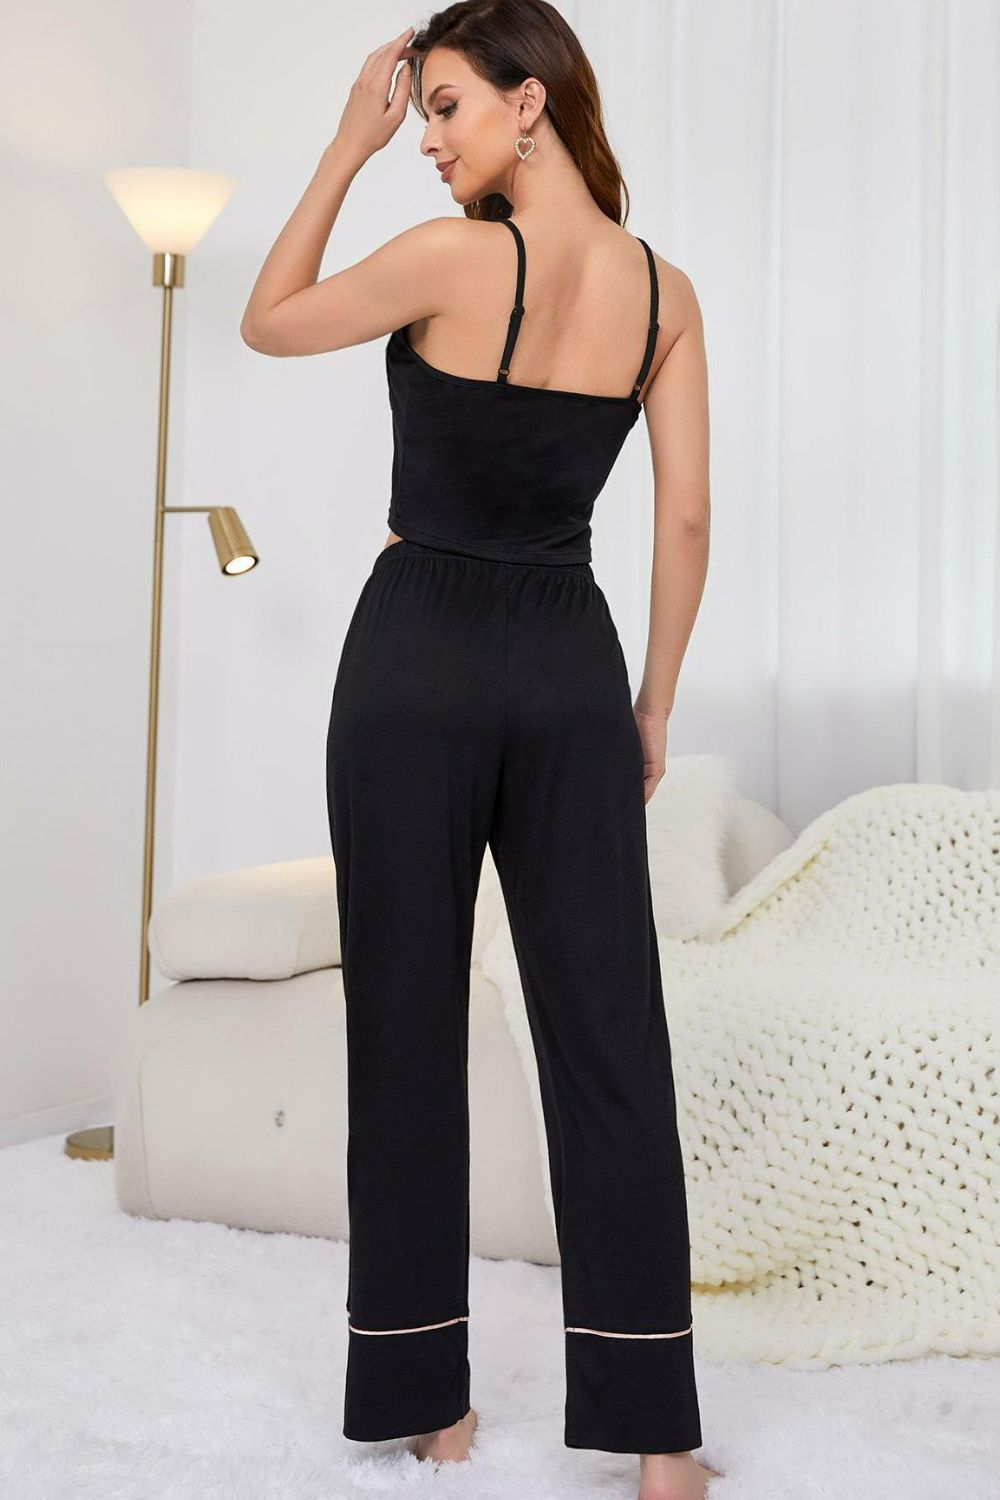 Classy Comfy Cropped Cami Loungewear Outfit